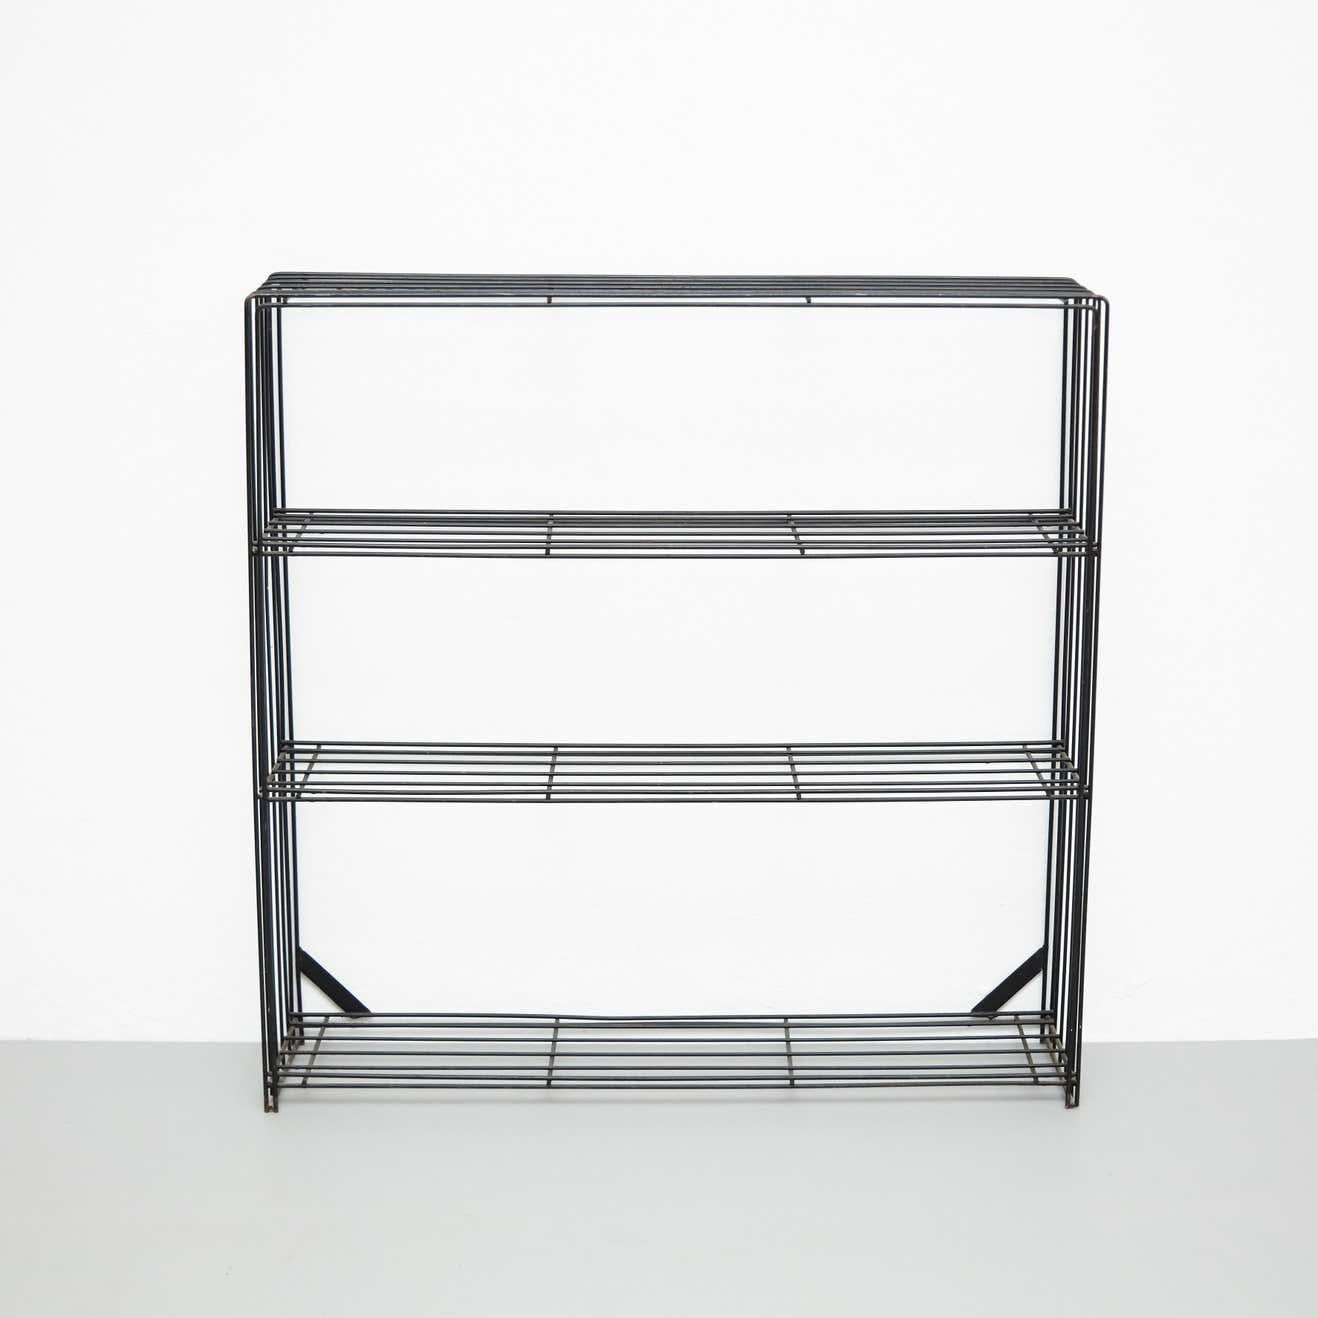 Minimalist black metal bookshelves.
By unknown manufacturer, Netherlands, circa 1960.

In original condition, with minor wear consistent with age and use, preserving a beautiful patina.

Materials:
Black metal

Dimensions:
D 23 cm x W 100